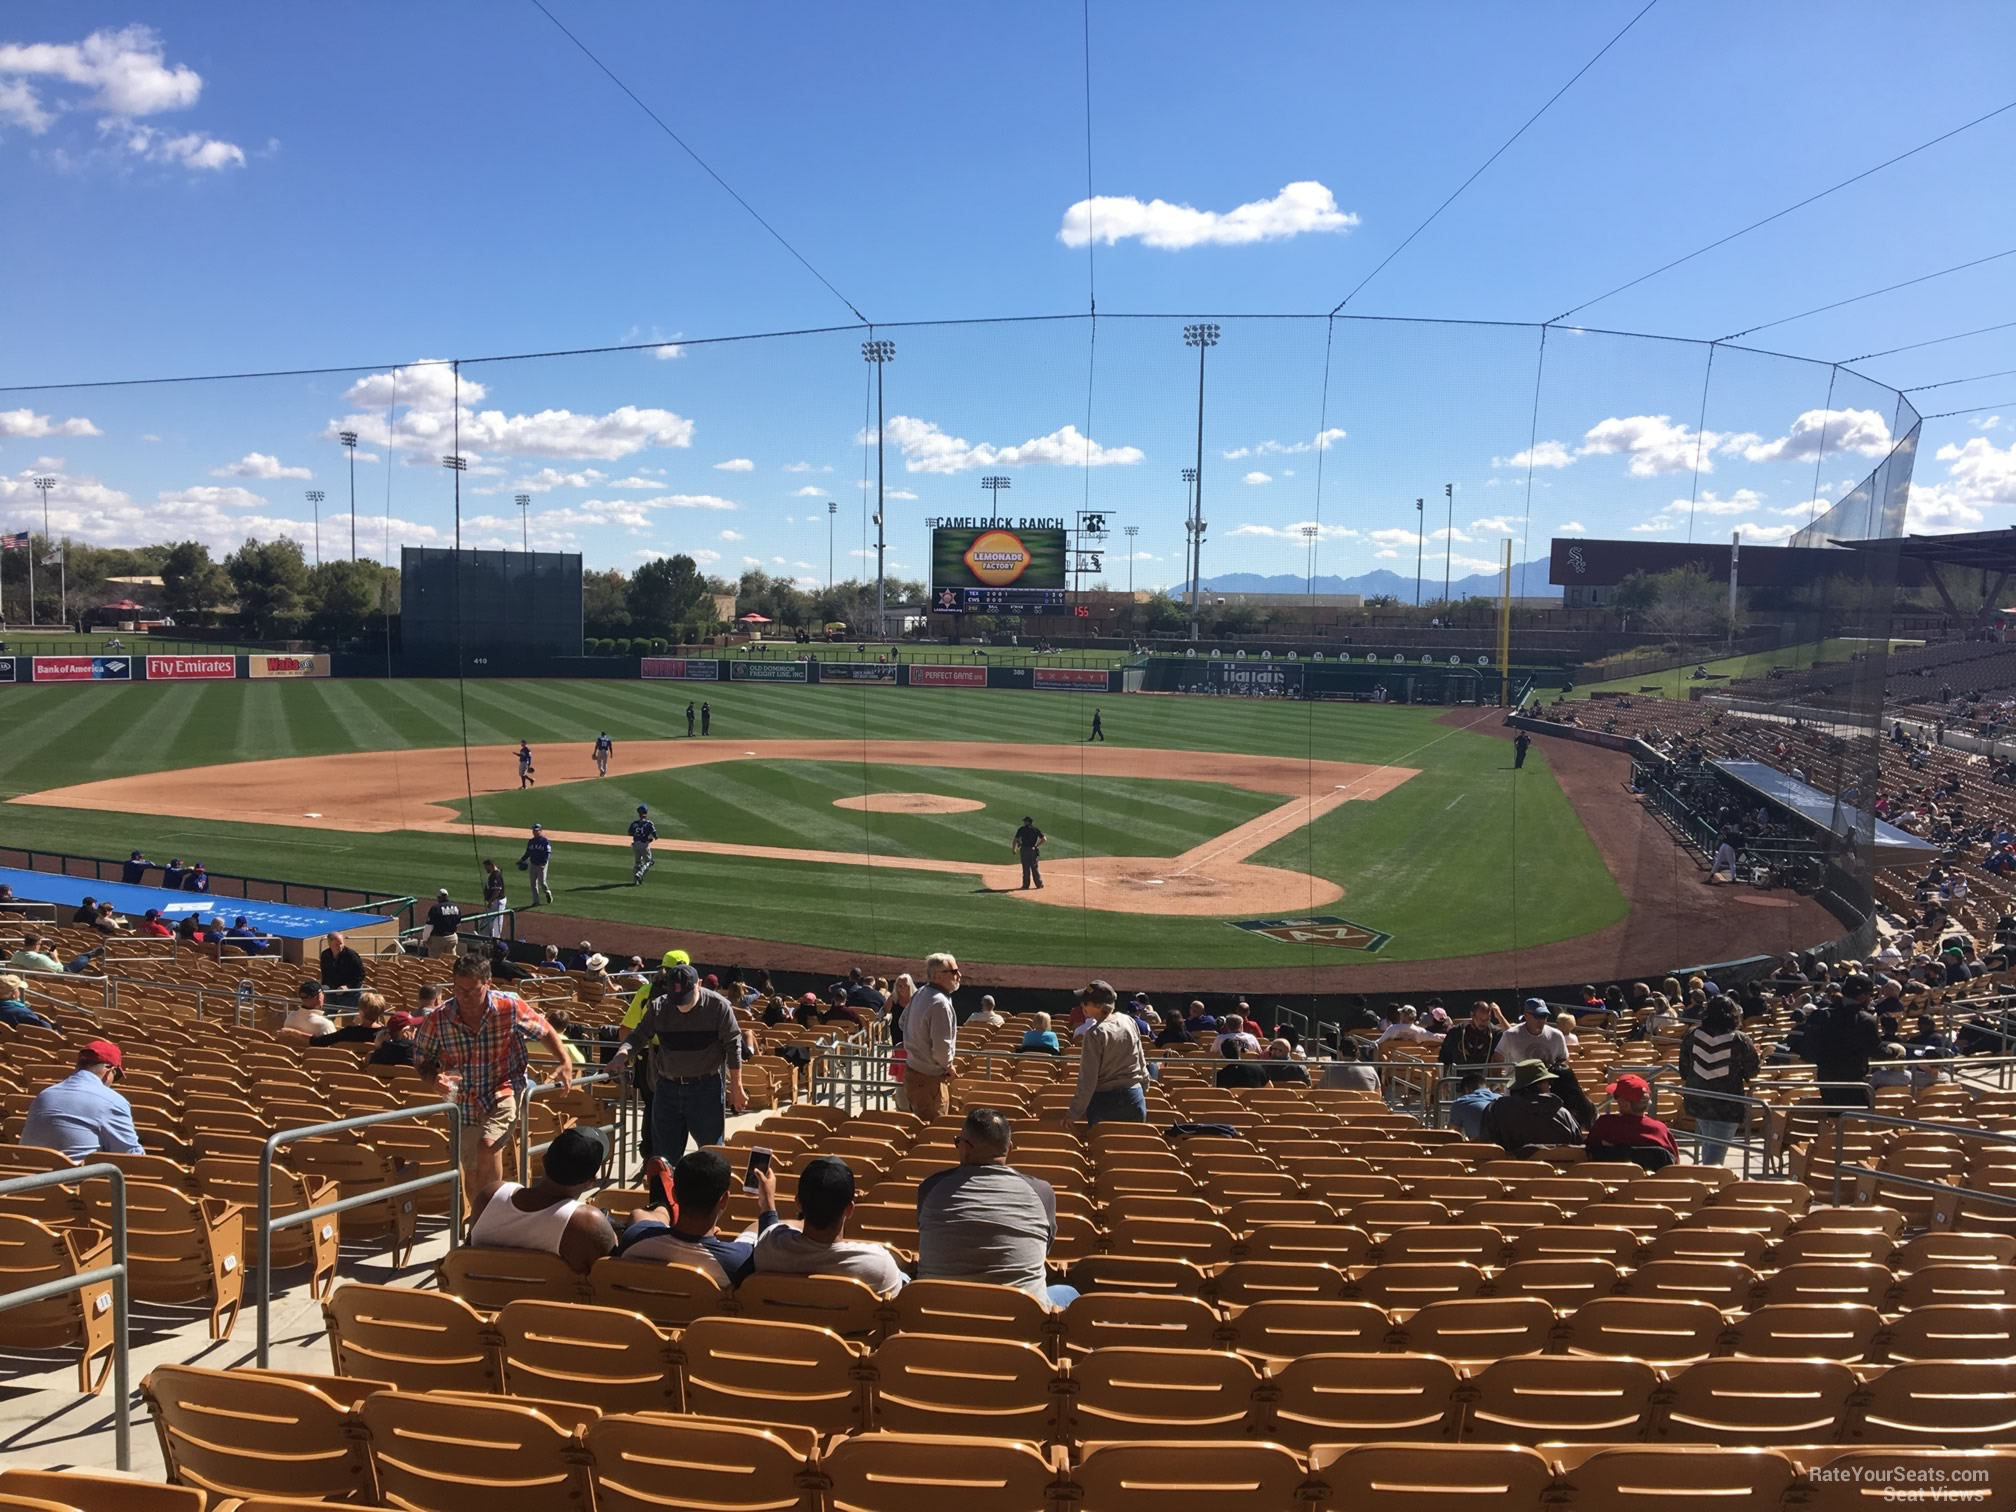 section 117, row 18 seat view  - camelback ranch